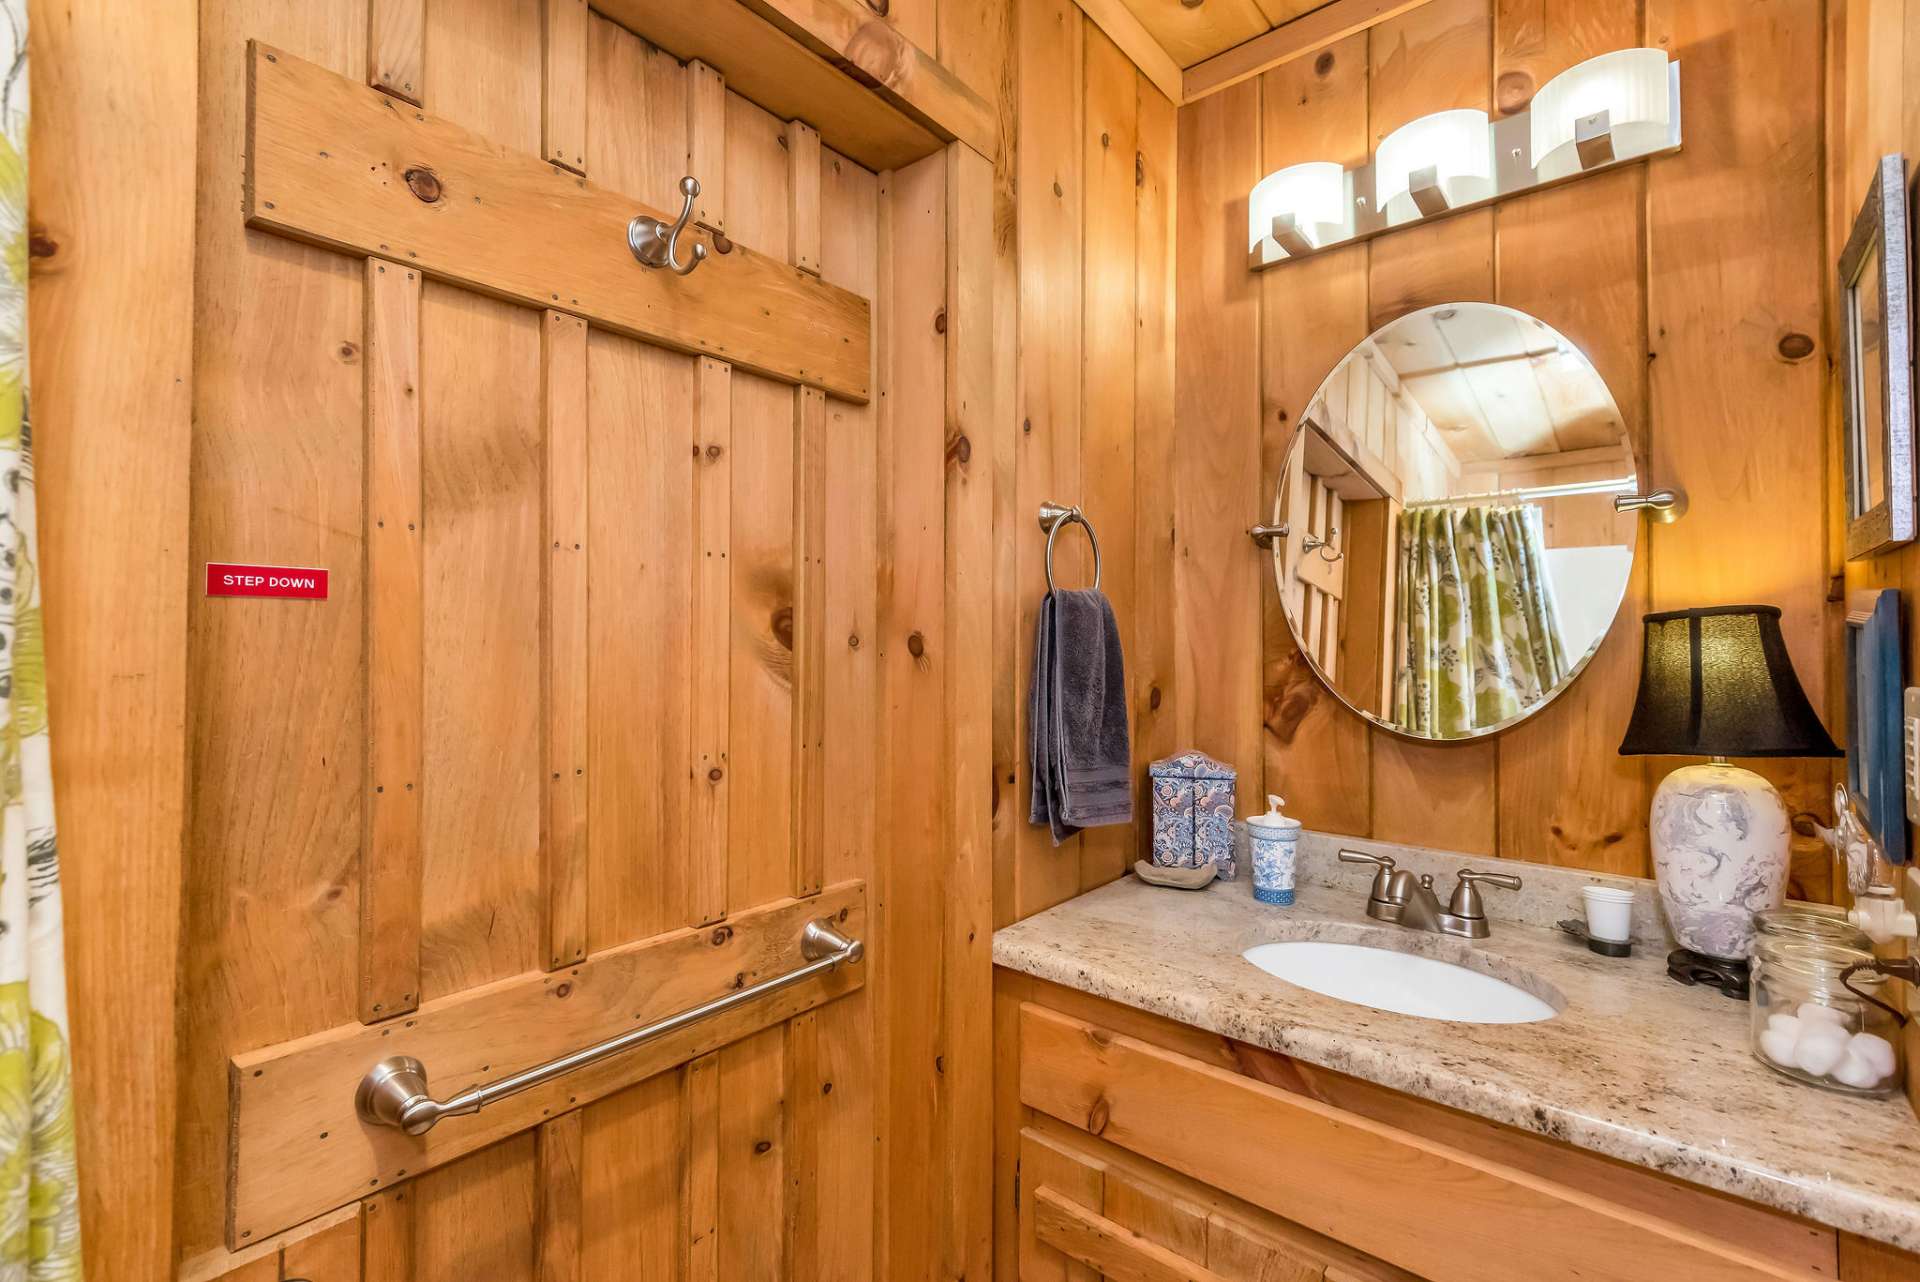 This cabin features granite counter-tops throughout all bathrooms.